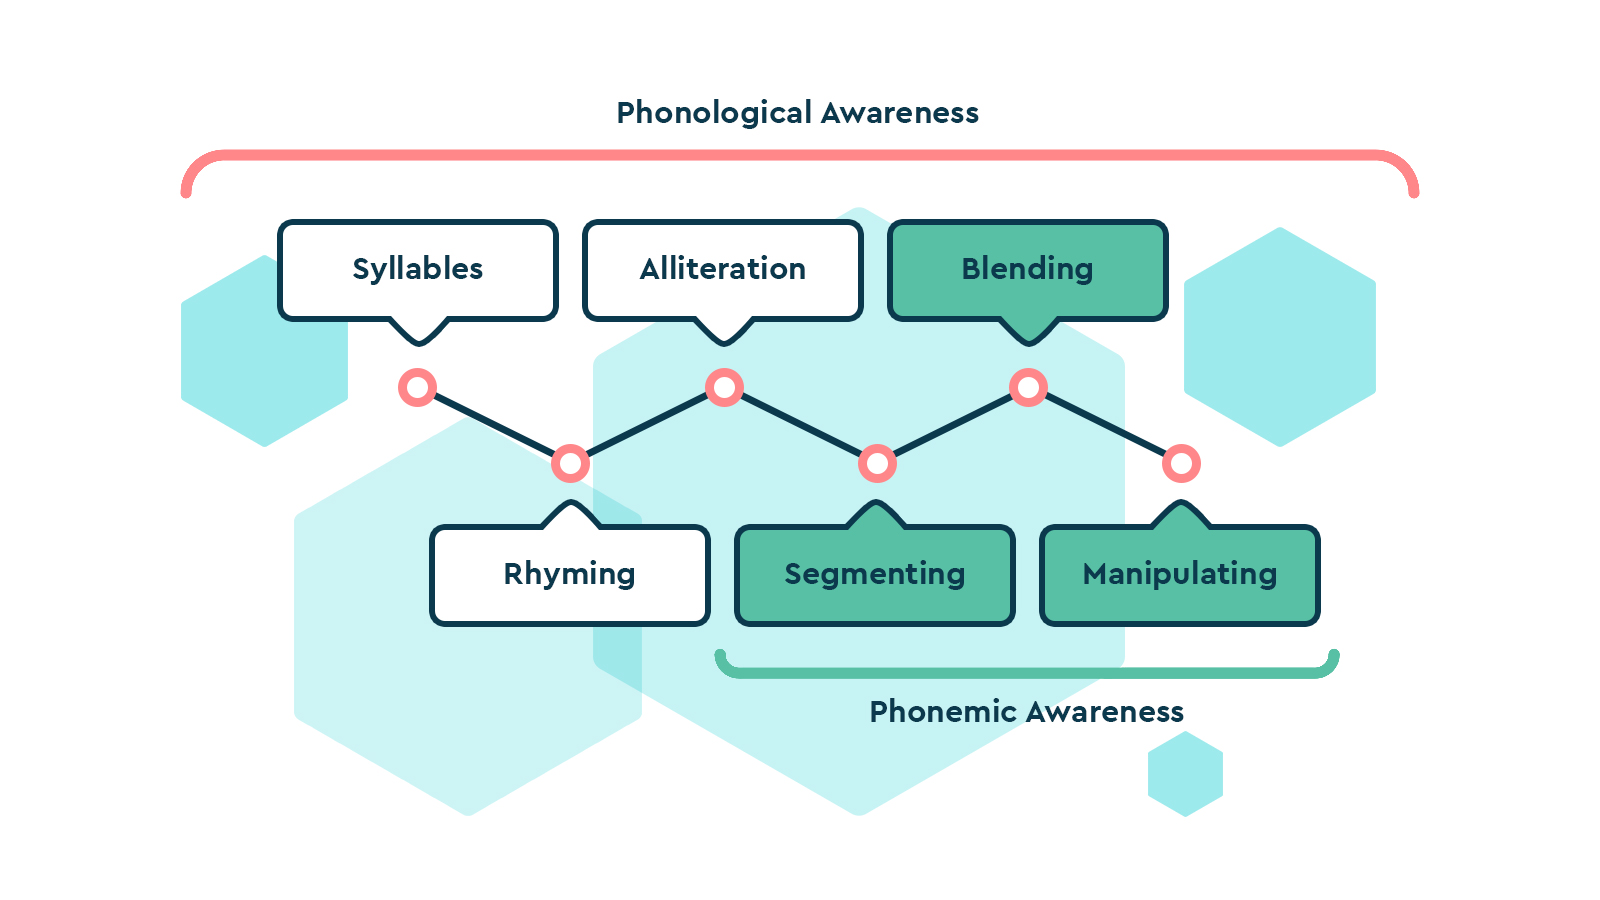 An chart showing the relationship between phonological and phonemic awareness.